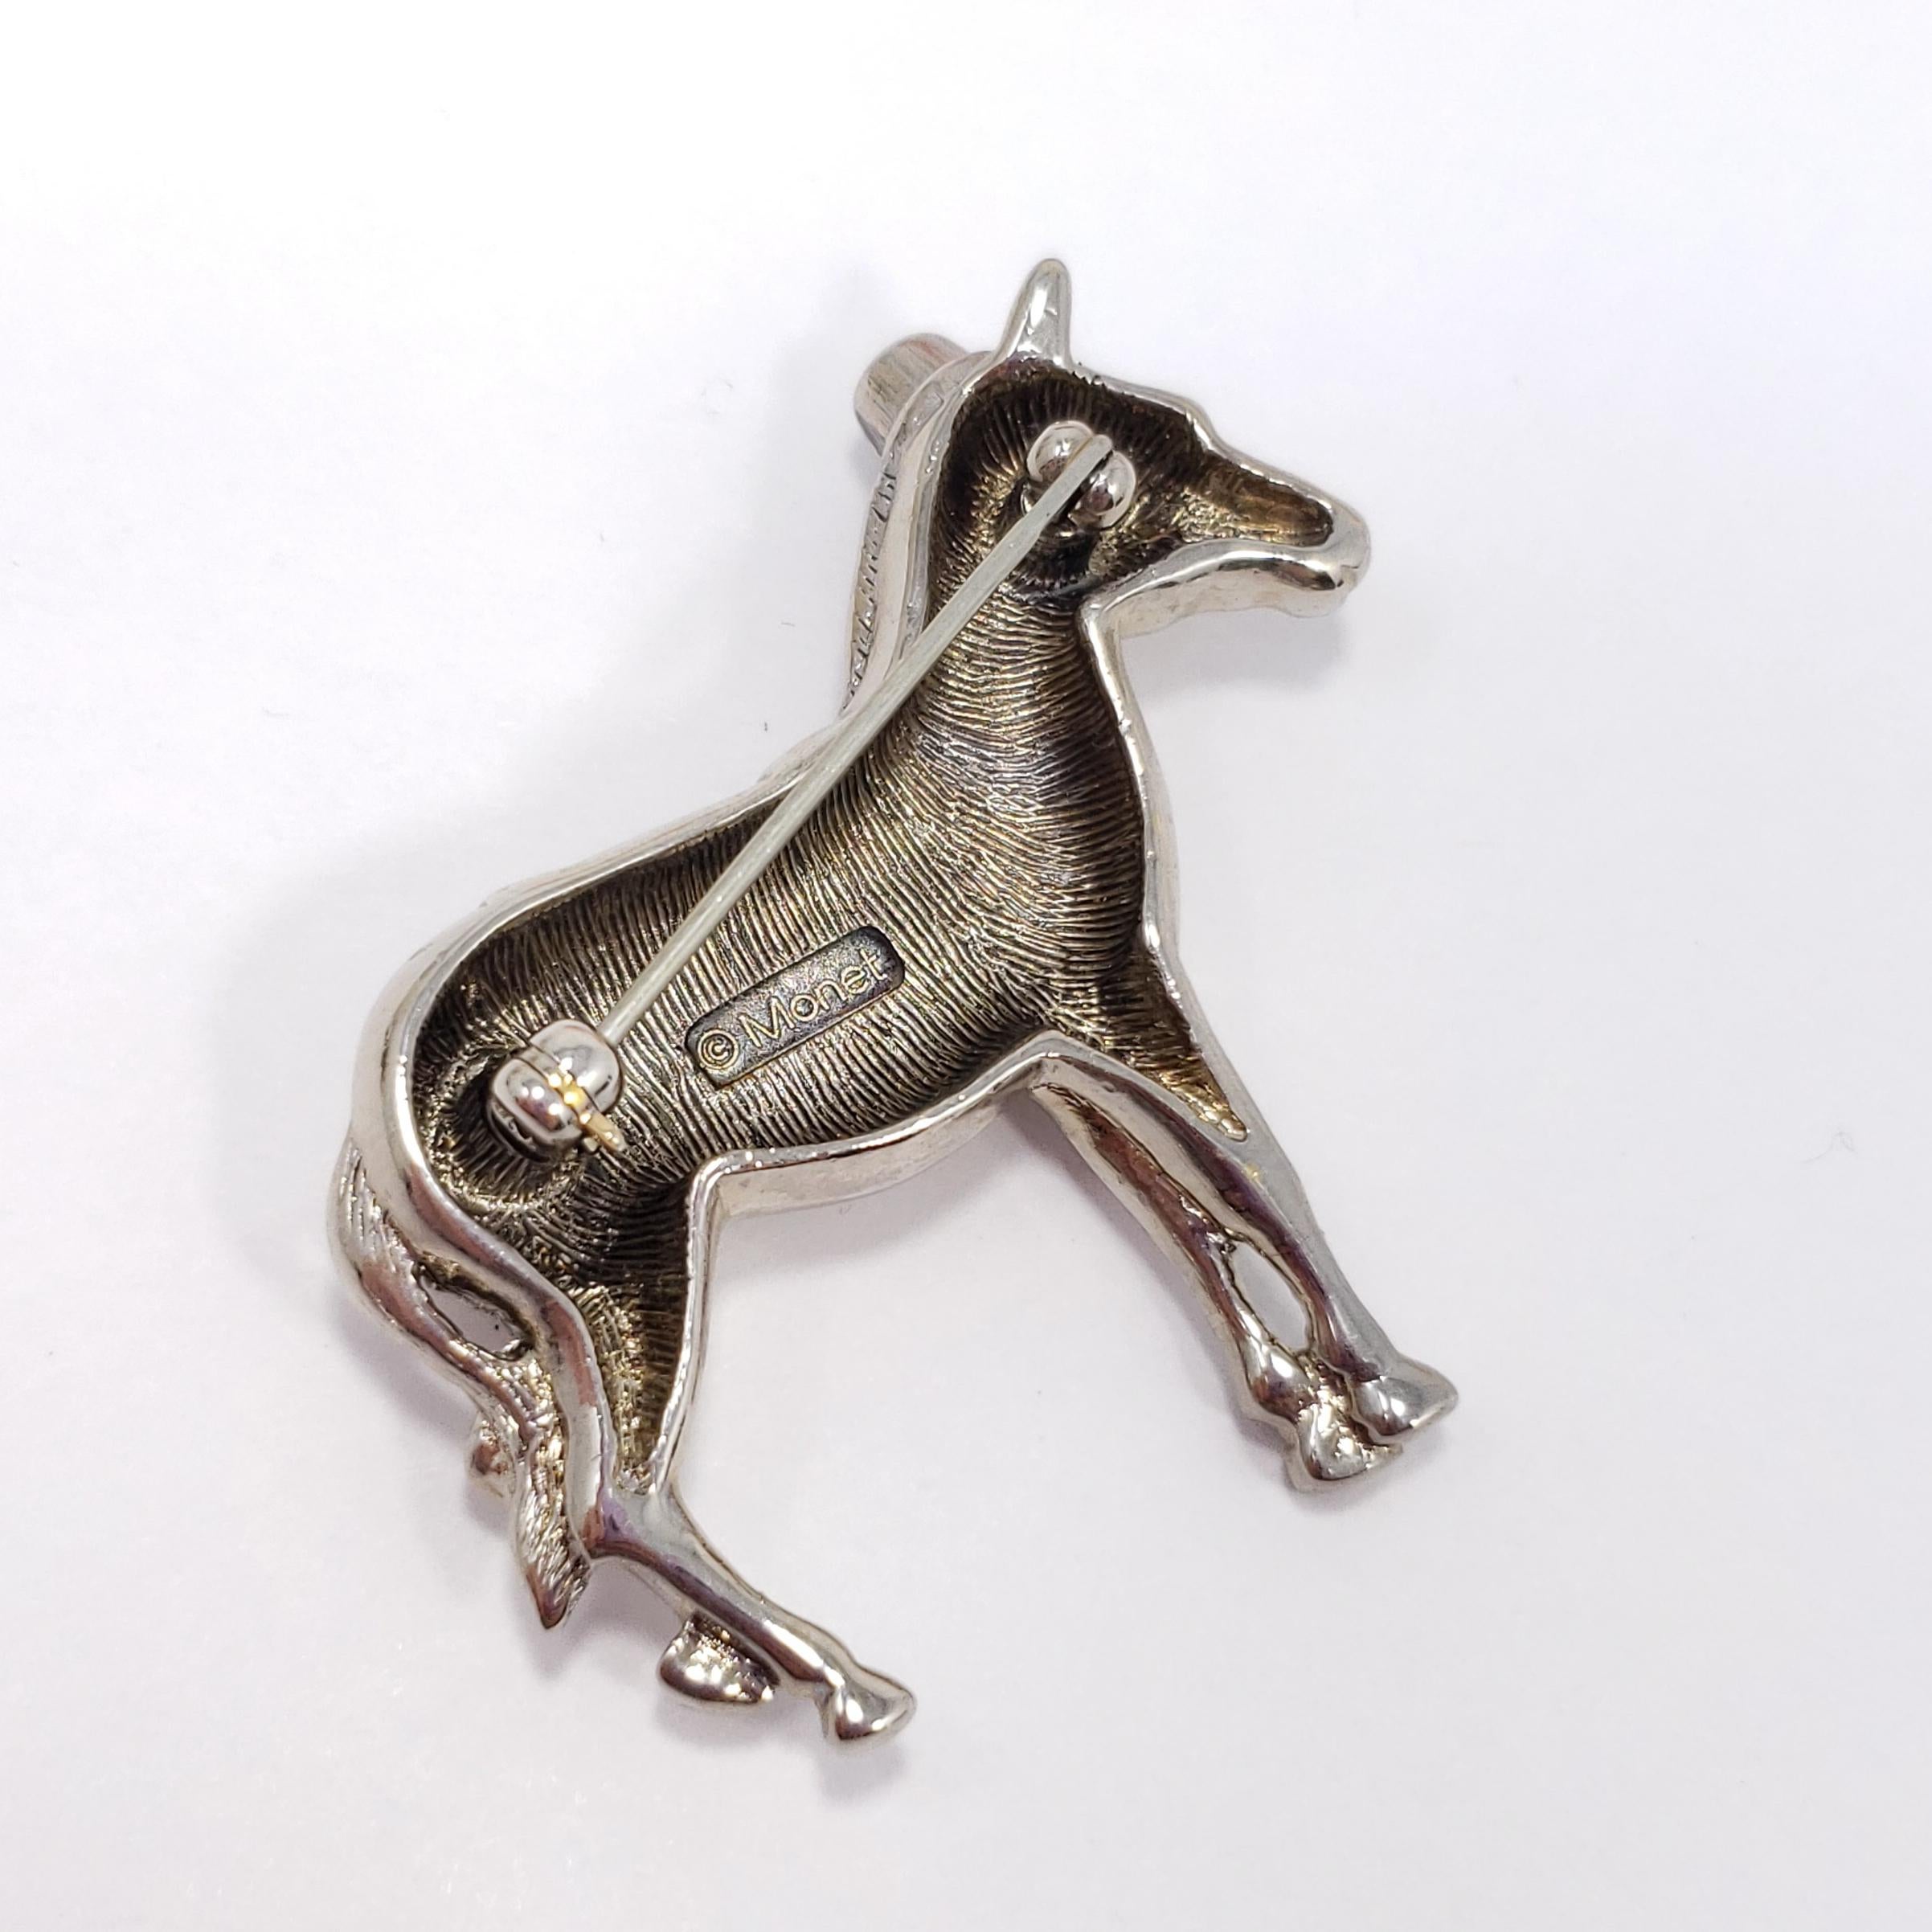 Retro Vintage Monet Democratic Donkey Pin Brooch in Silver, Red and Blue Enamel For Sale